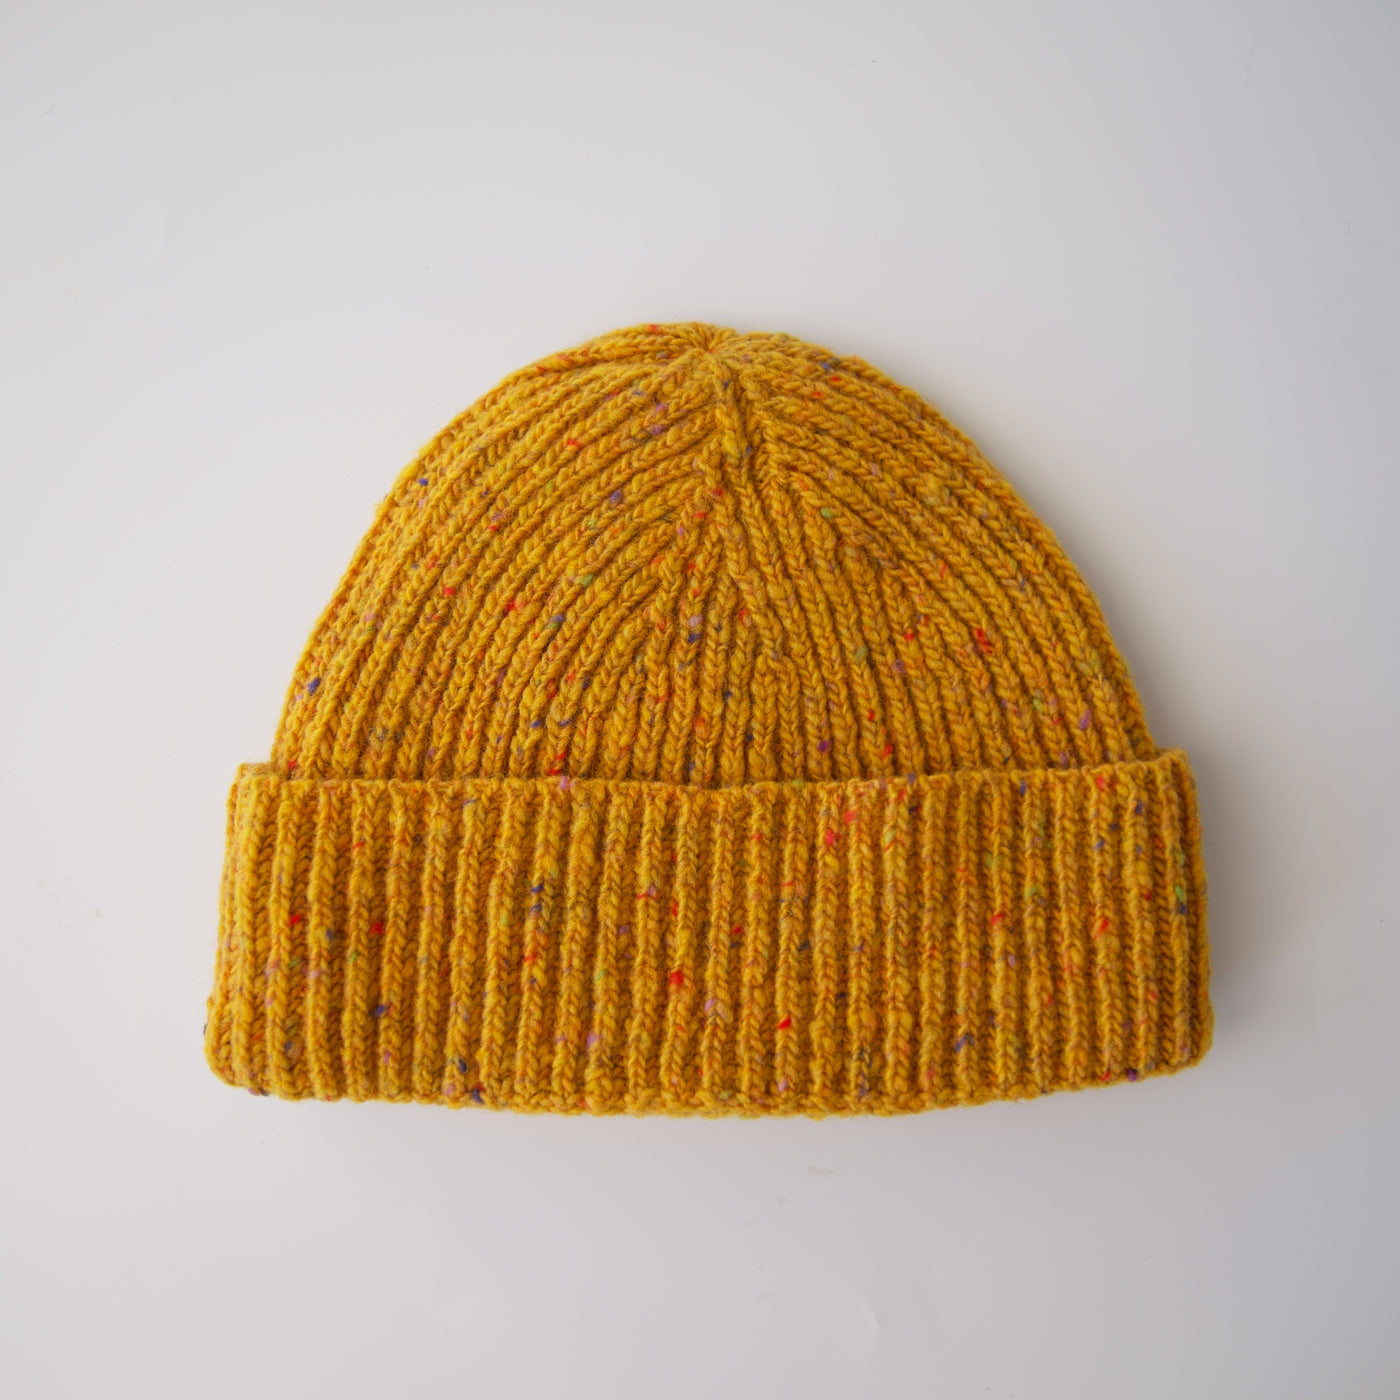 Donegal Tweed Beanie - Yellow